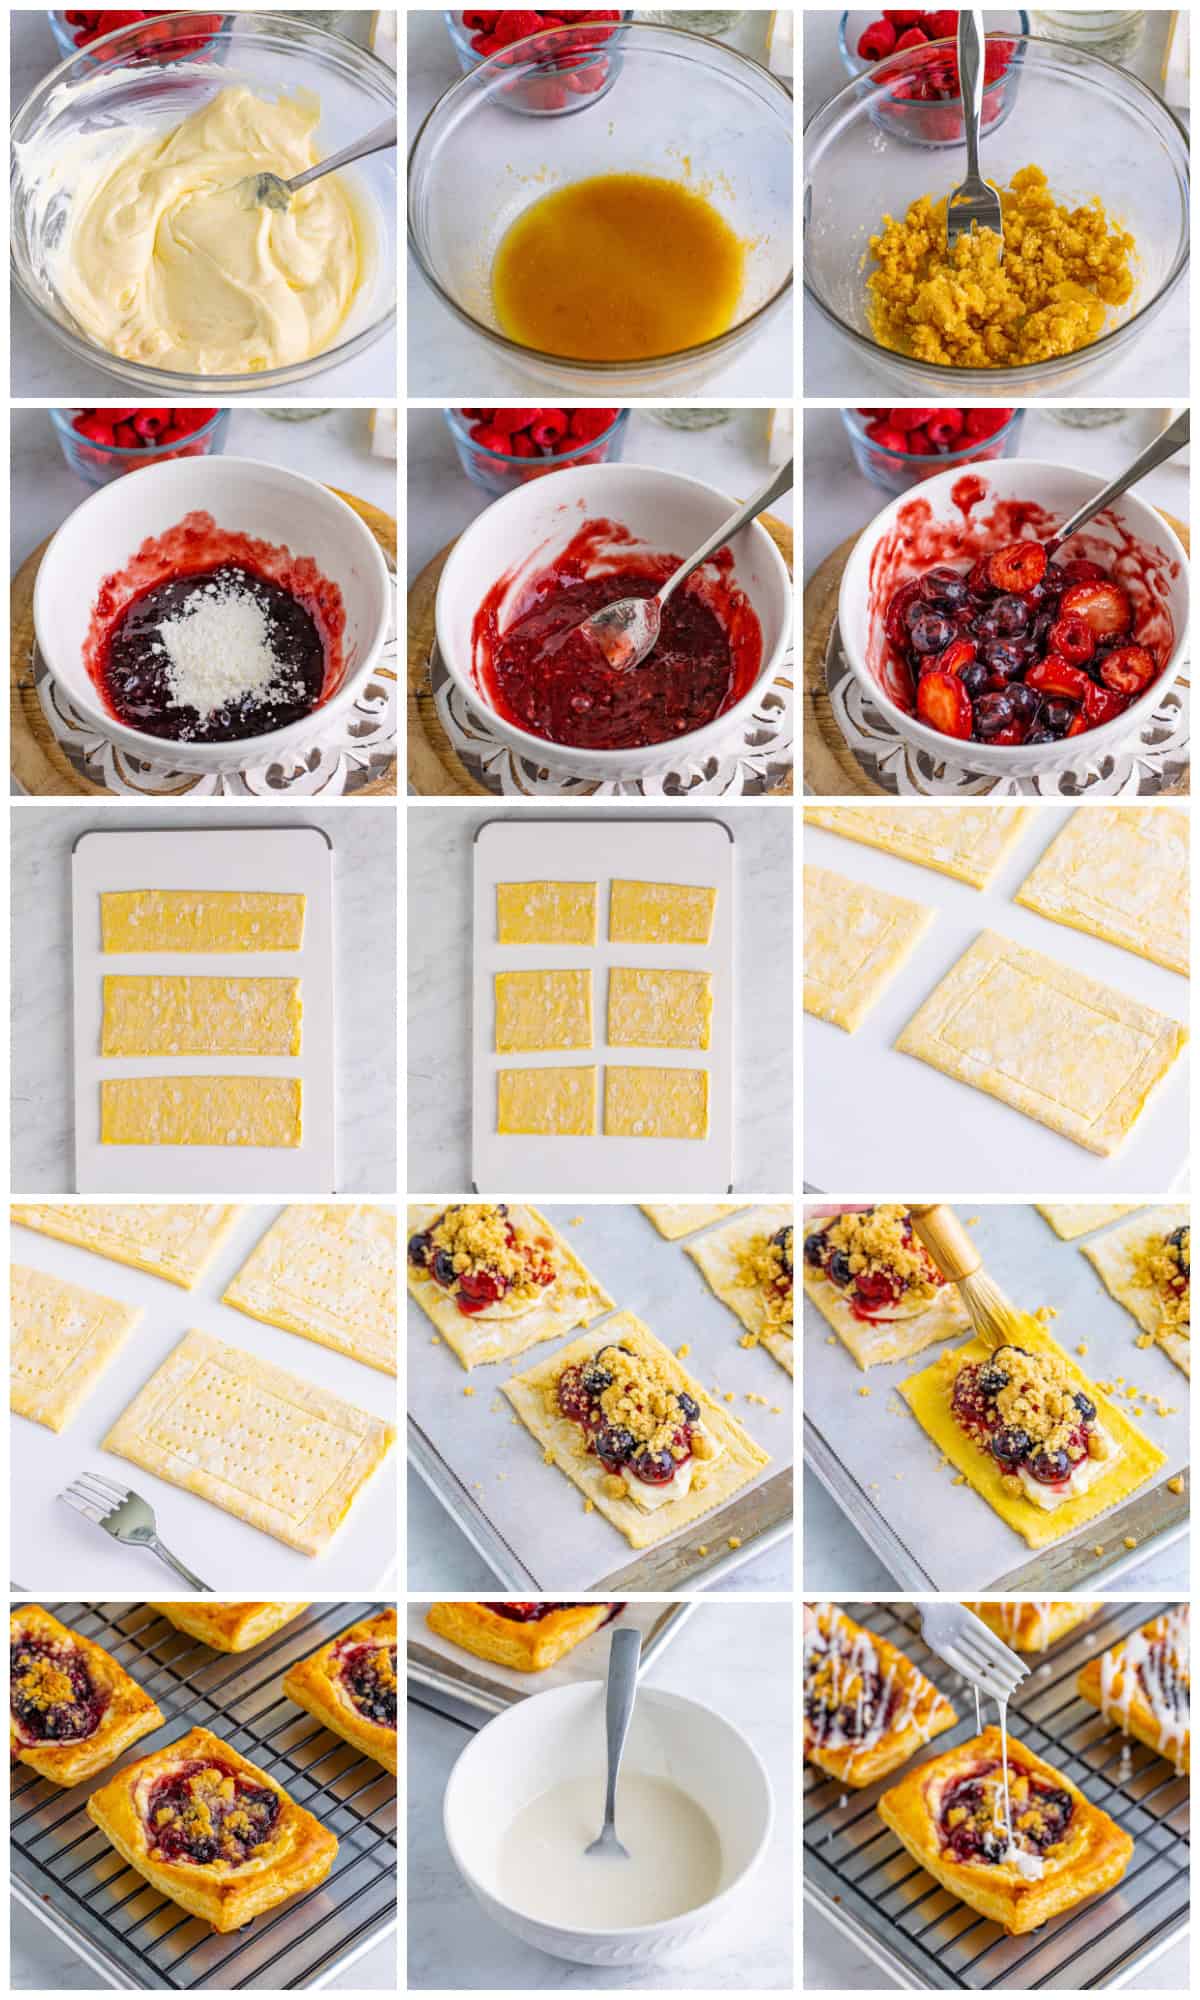 Step by step photos on how to make Mixed Berry Danishes.